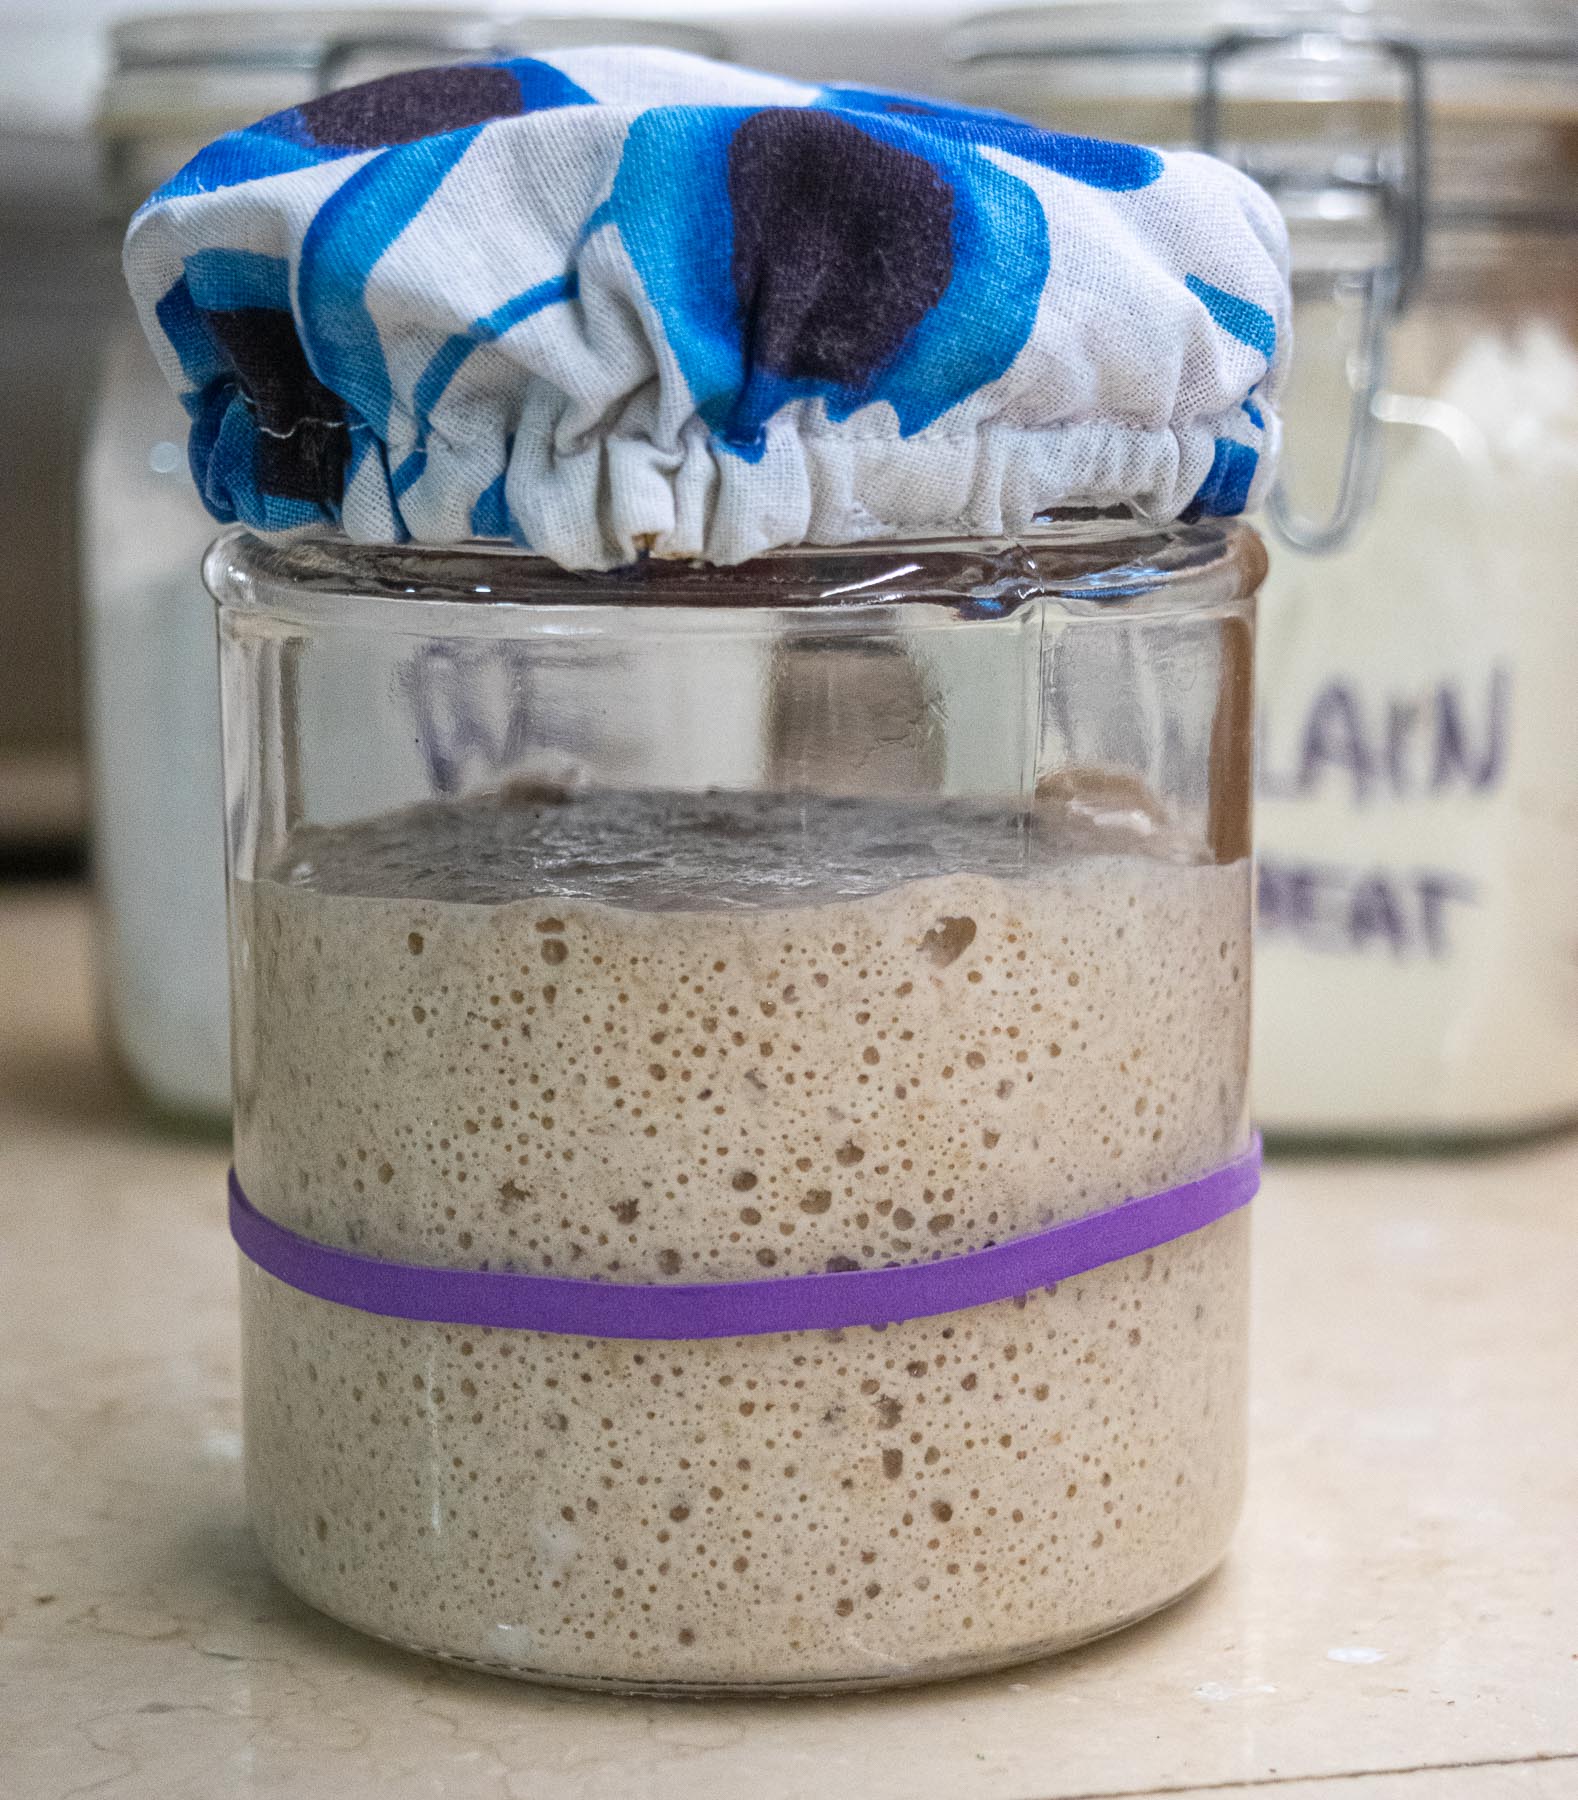 How to Make a Sourdough Starter from Scratch.